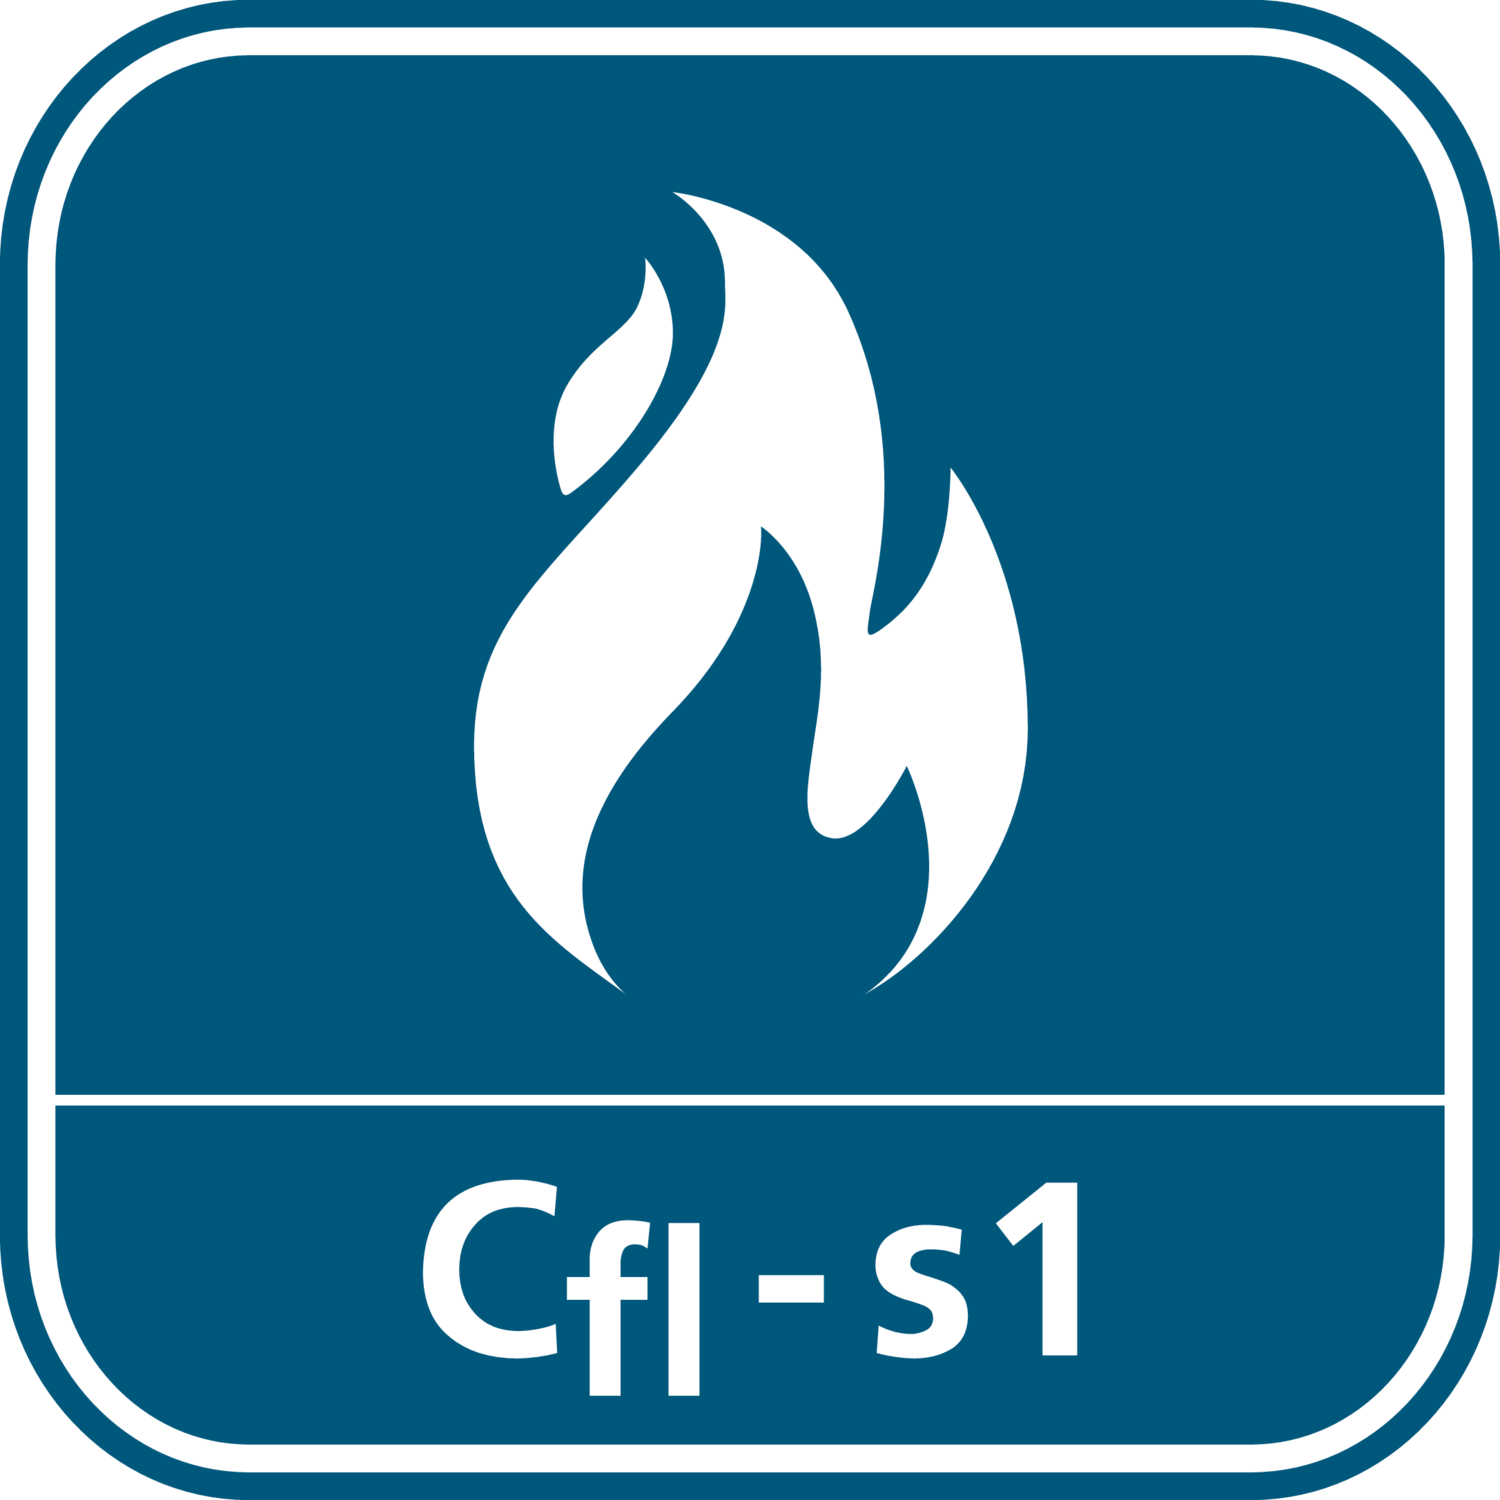 Flammability in accordance with European standard Cfl-s1 (formerly B1)